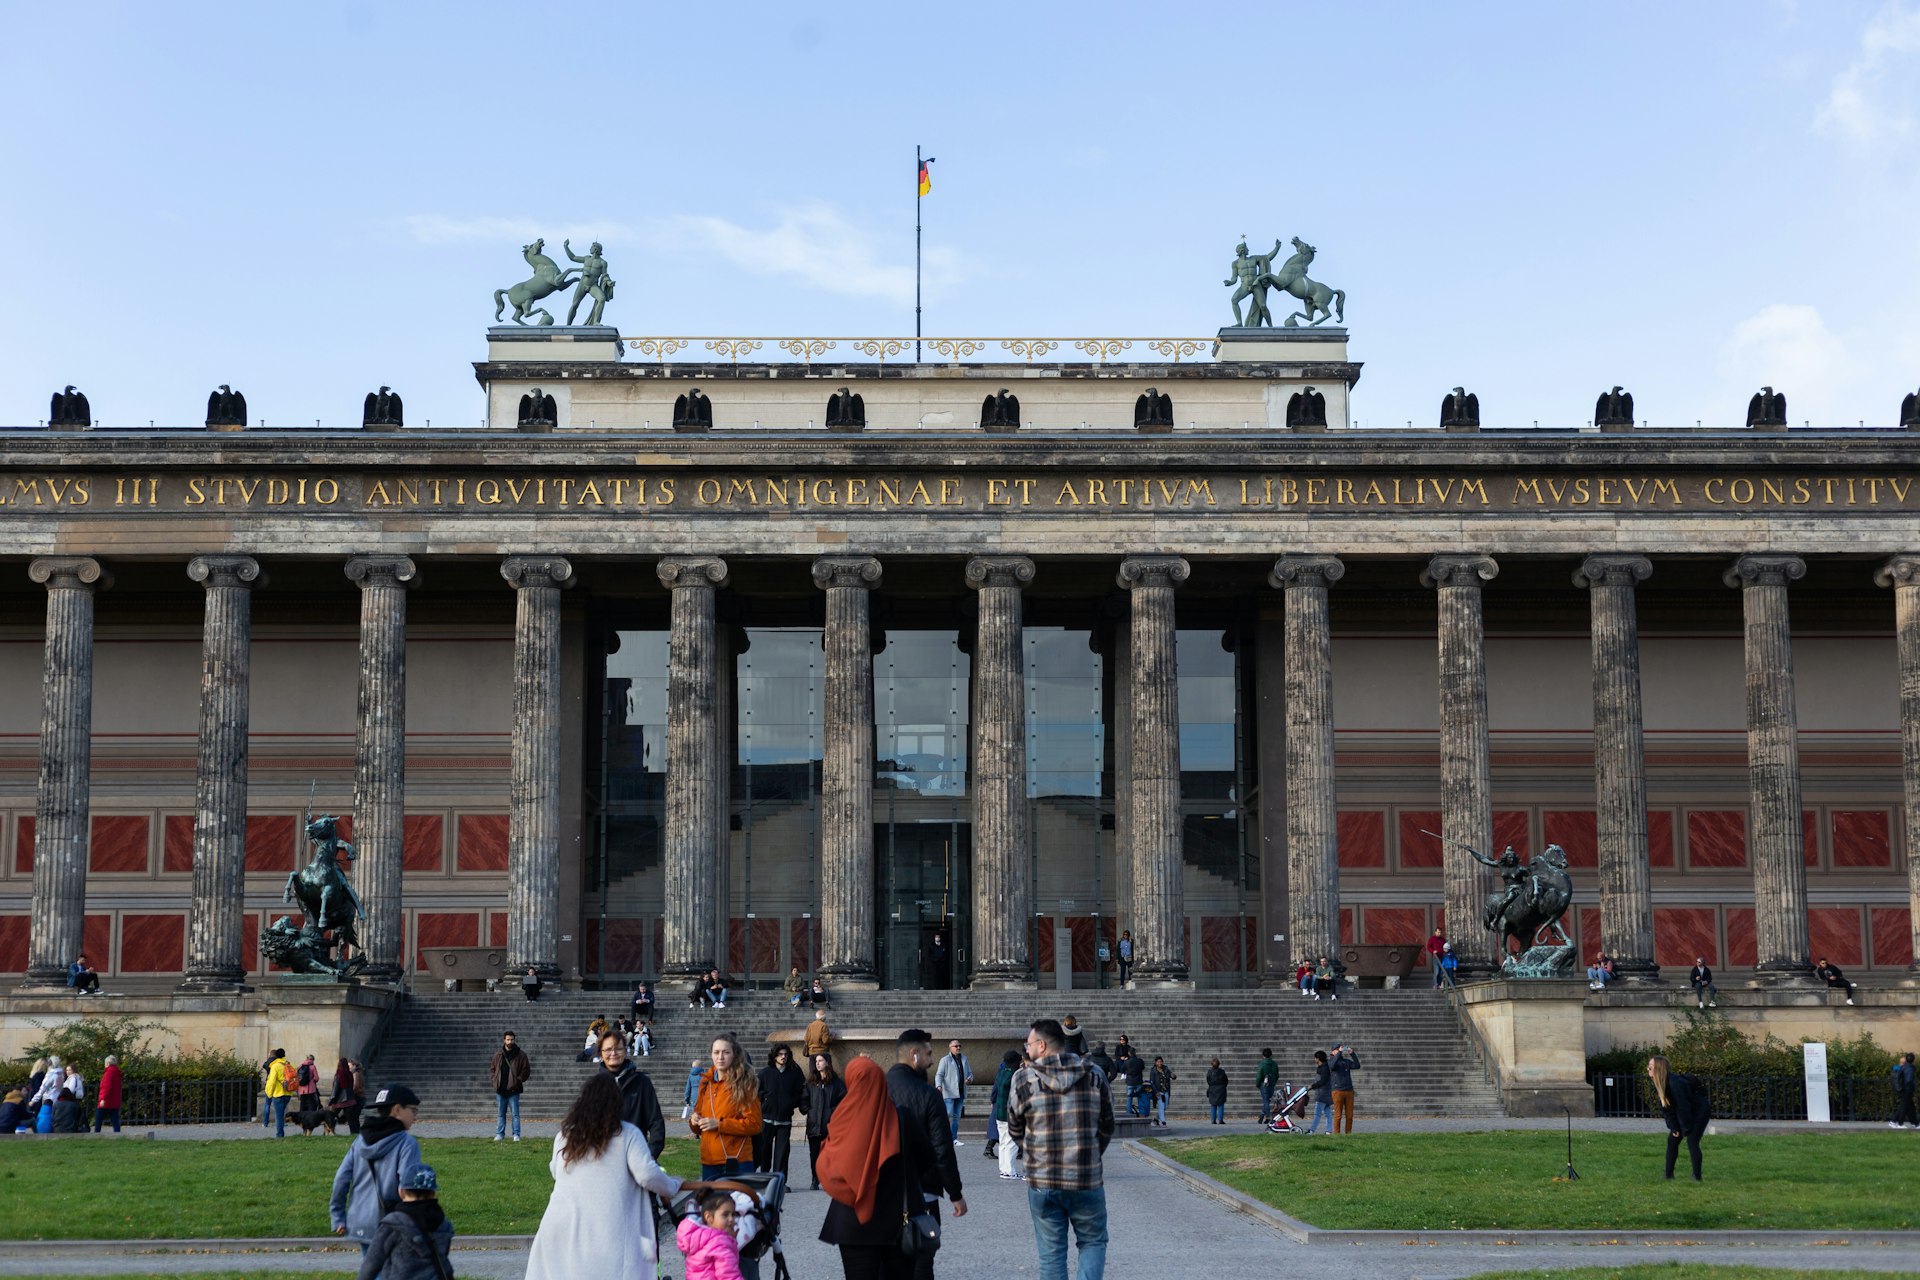 People congregate in front of the Classical facade of the Altes Museum, Berlin, Germany